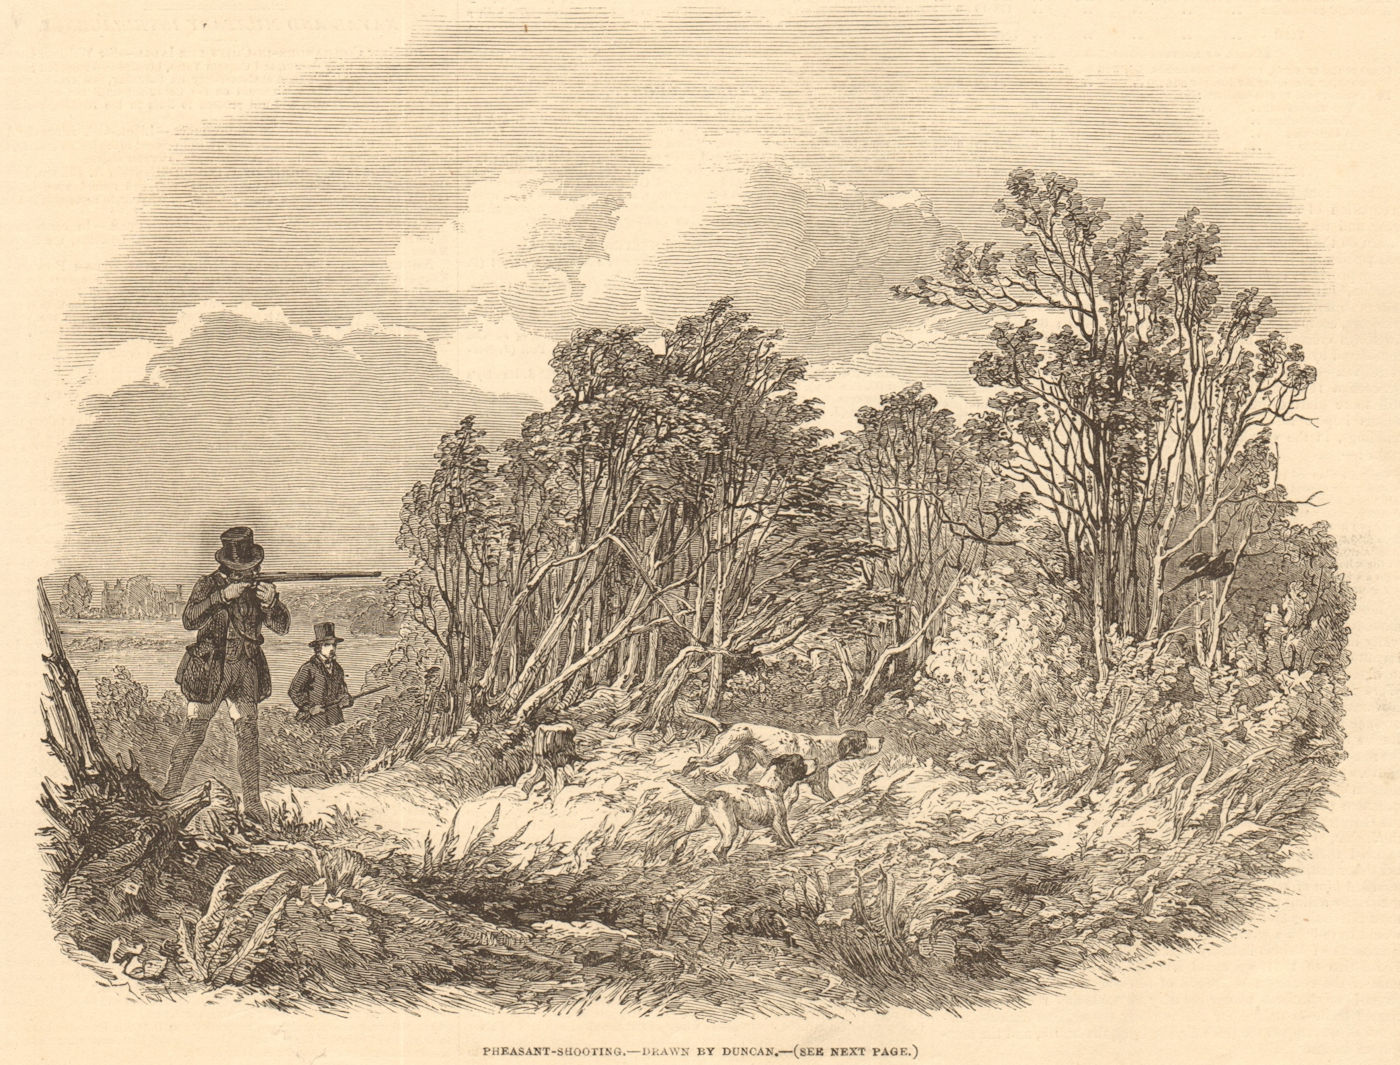 Associate Product Pheasant-shooting - drawn by Duncan. England. Hunting 1850 ILN full page print